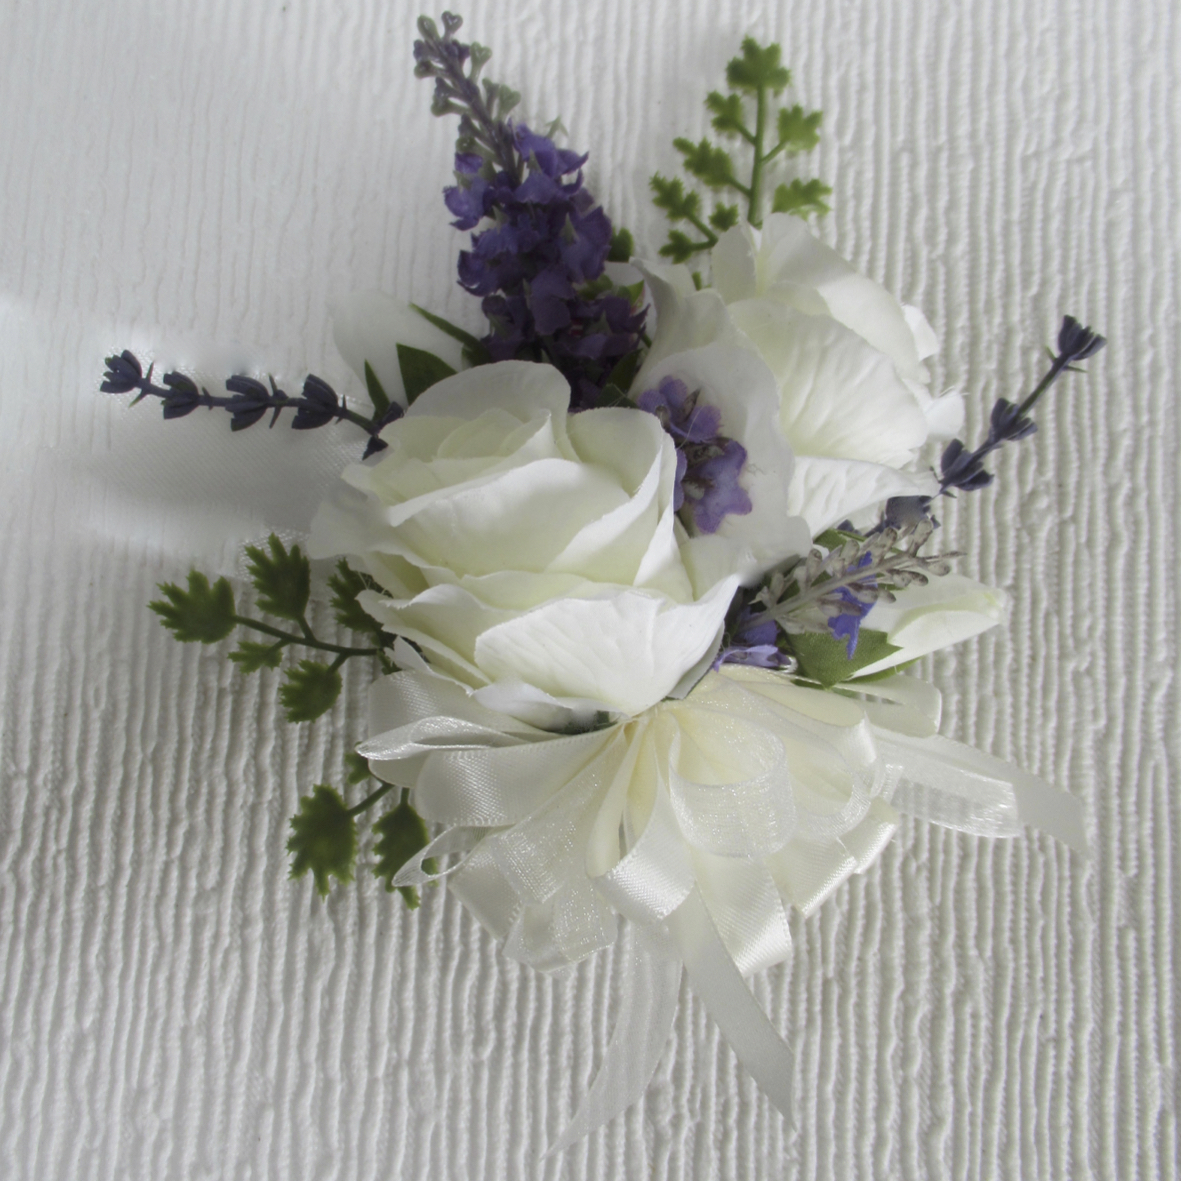 ovory silk roses with lavender pin on corsage, wedding corsage, female corsage